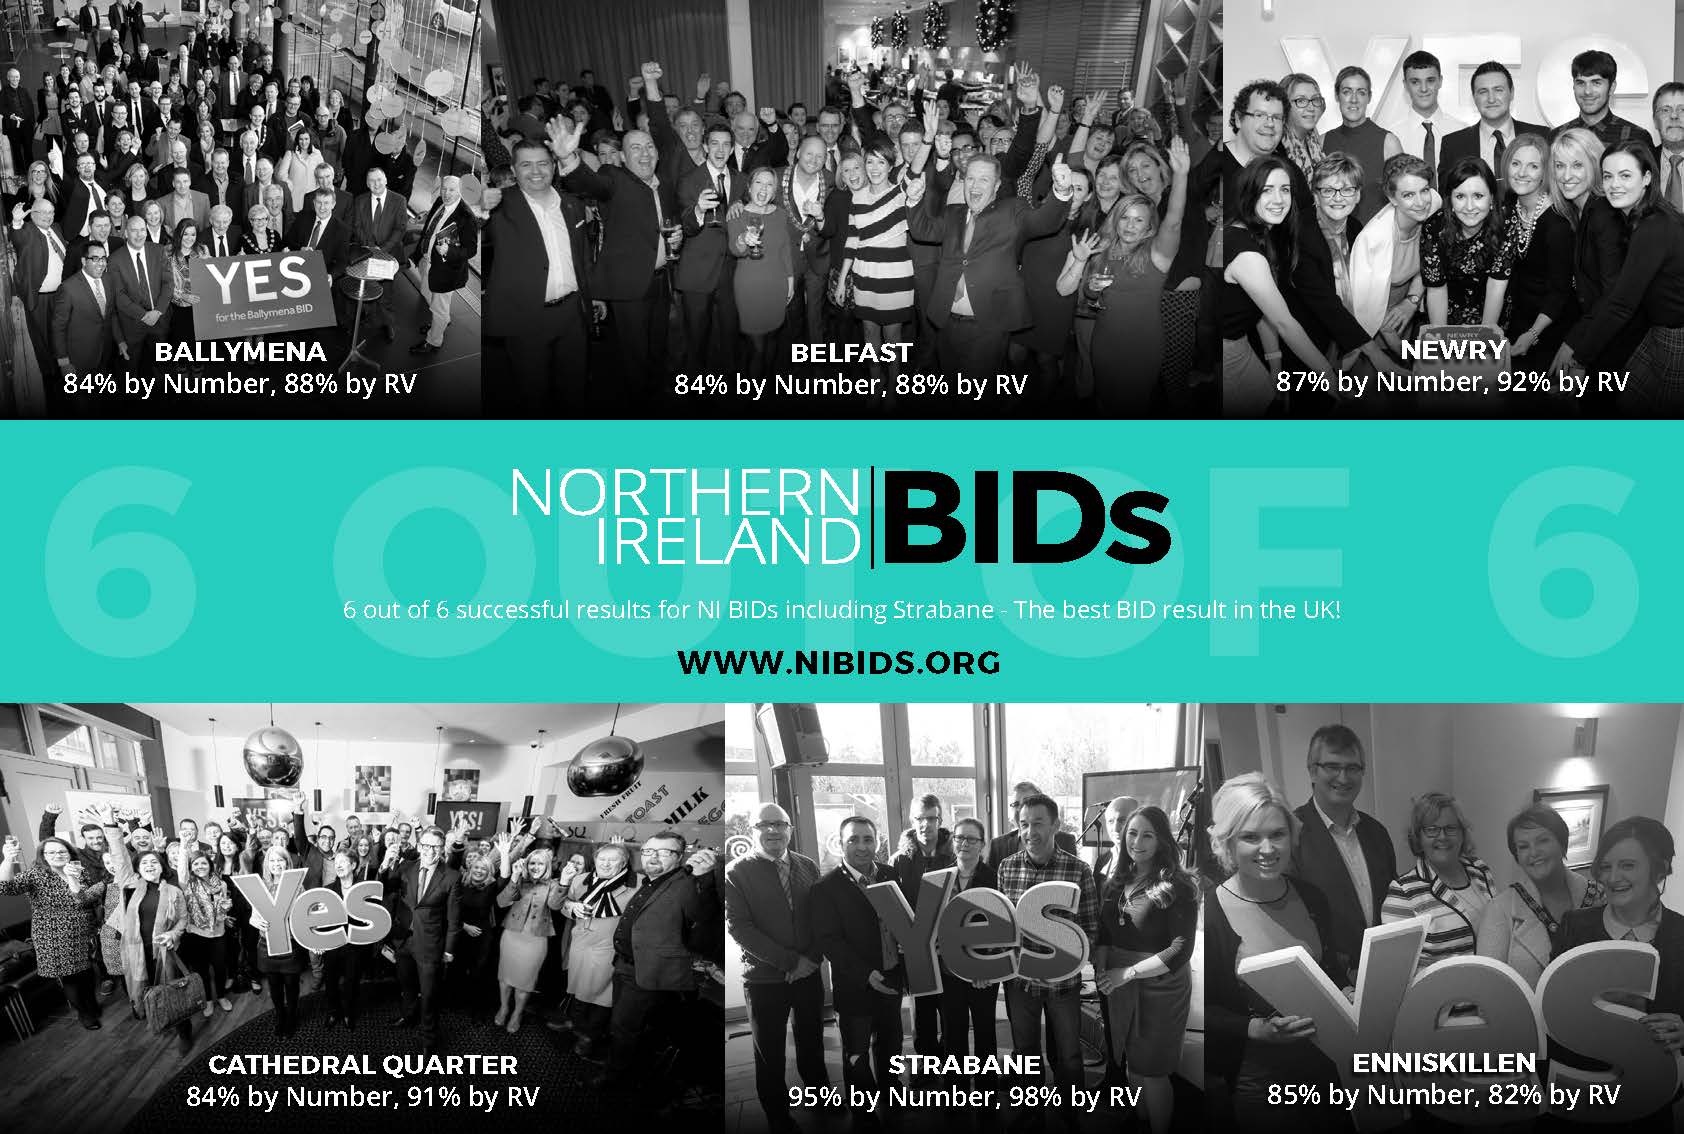 a 100% success rate for the NI BIDs academy